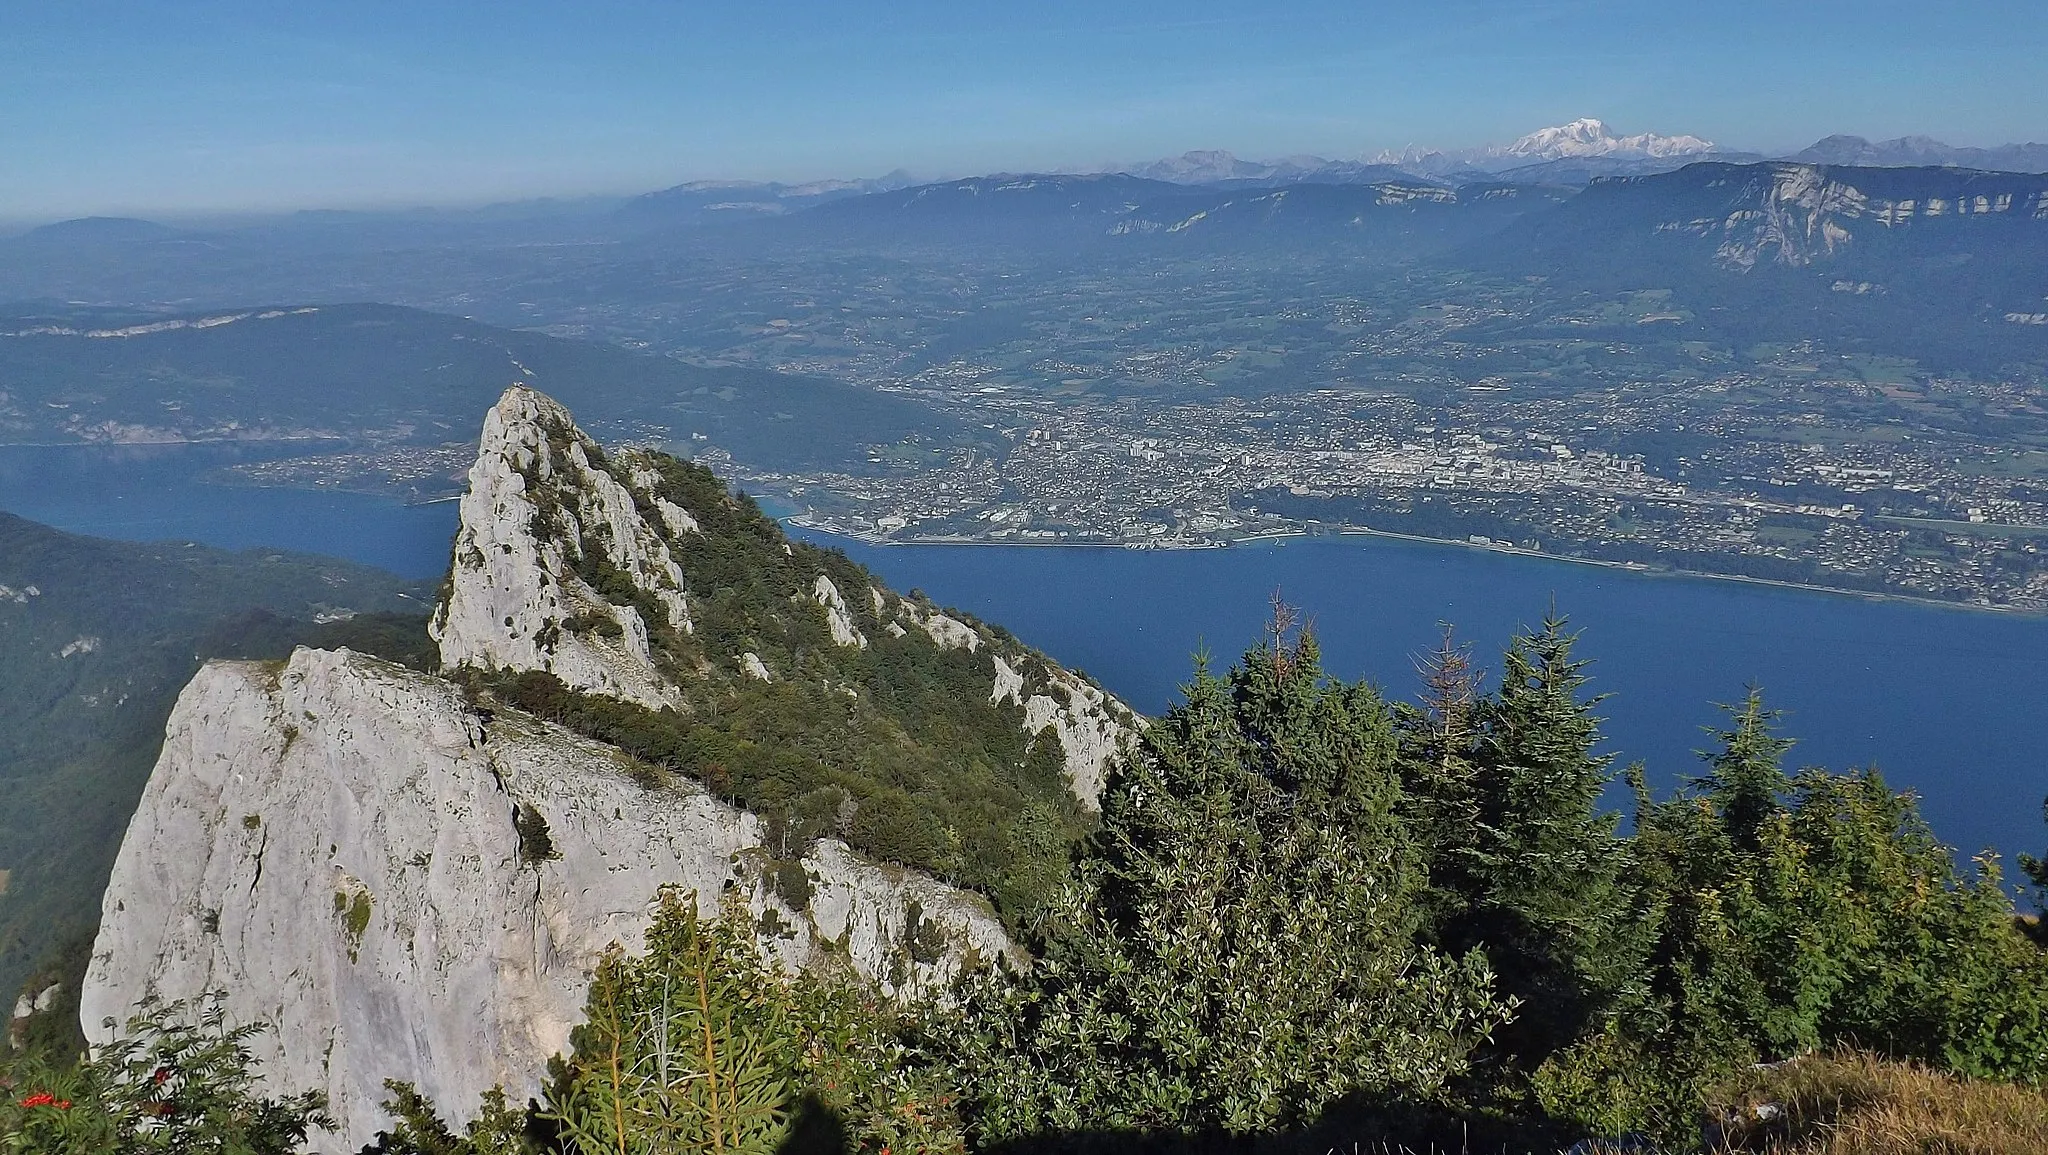 Photo showing: Panoramic sight of the dent du Chat mountain, the lac du Bourget lake, the city of Aix-les-Bains and the Mont-Blanc mount, in Savoie, France.